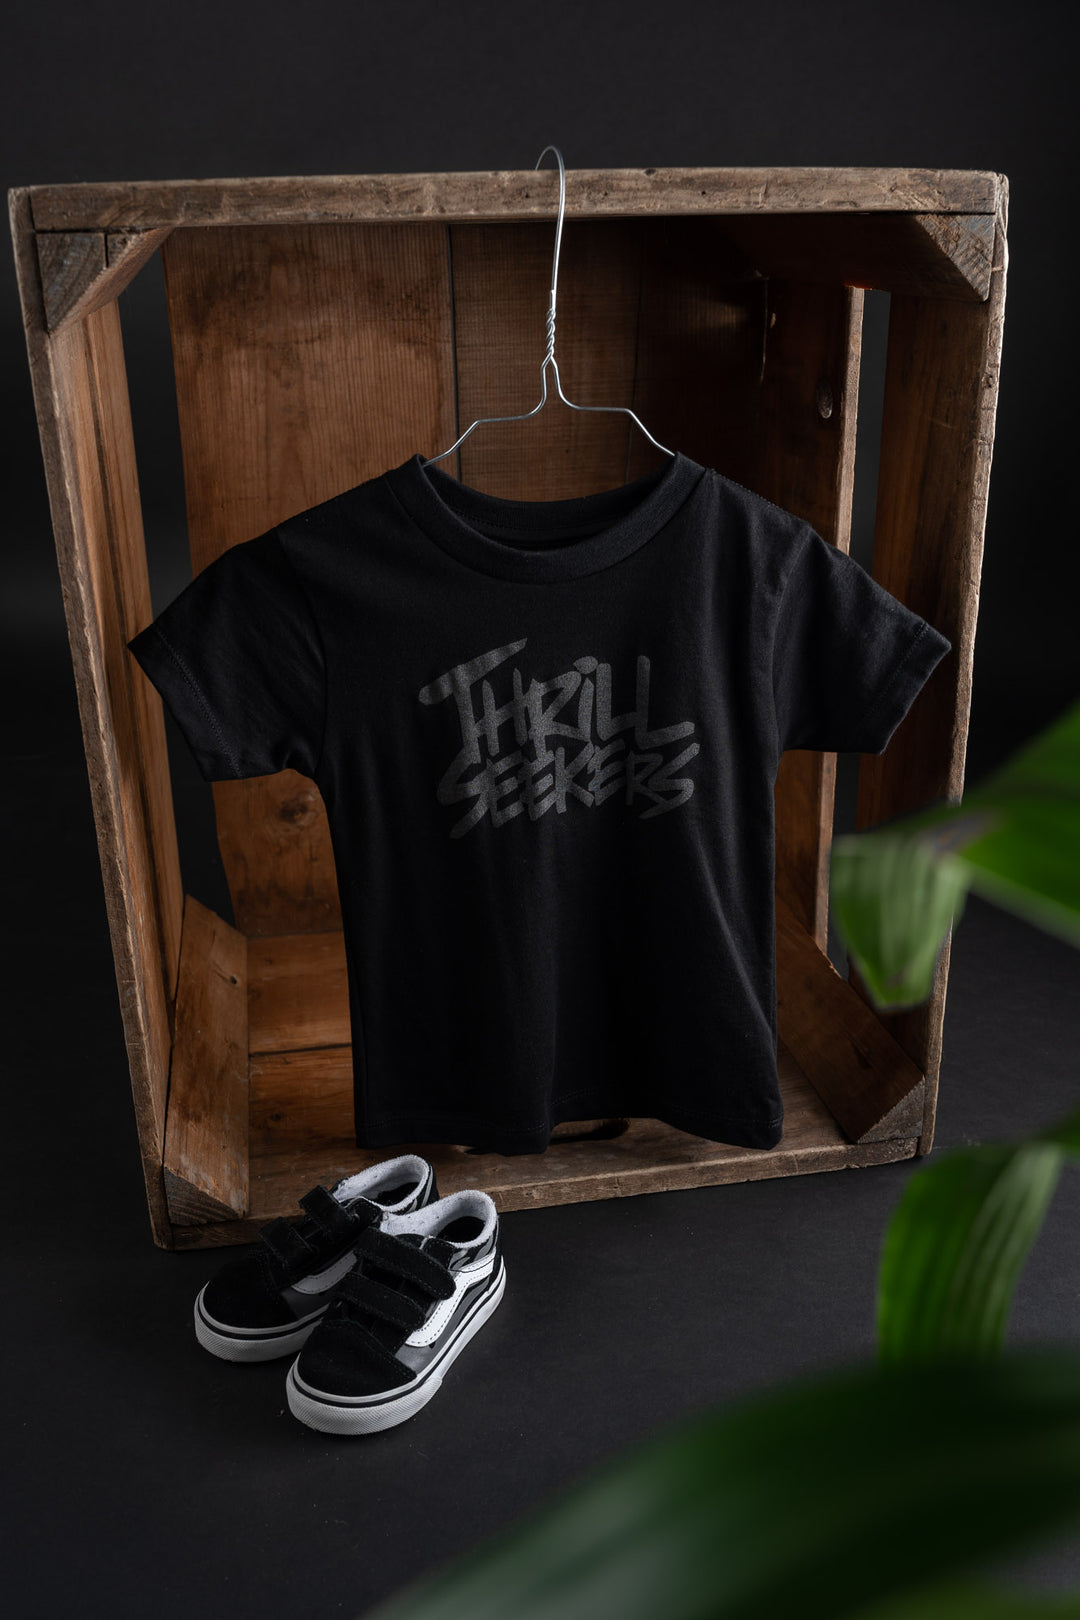 Thrill Seekers Classic Baby Tee Black